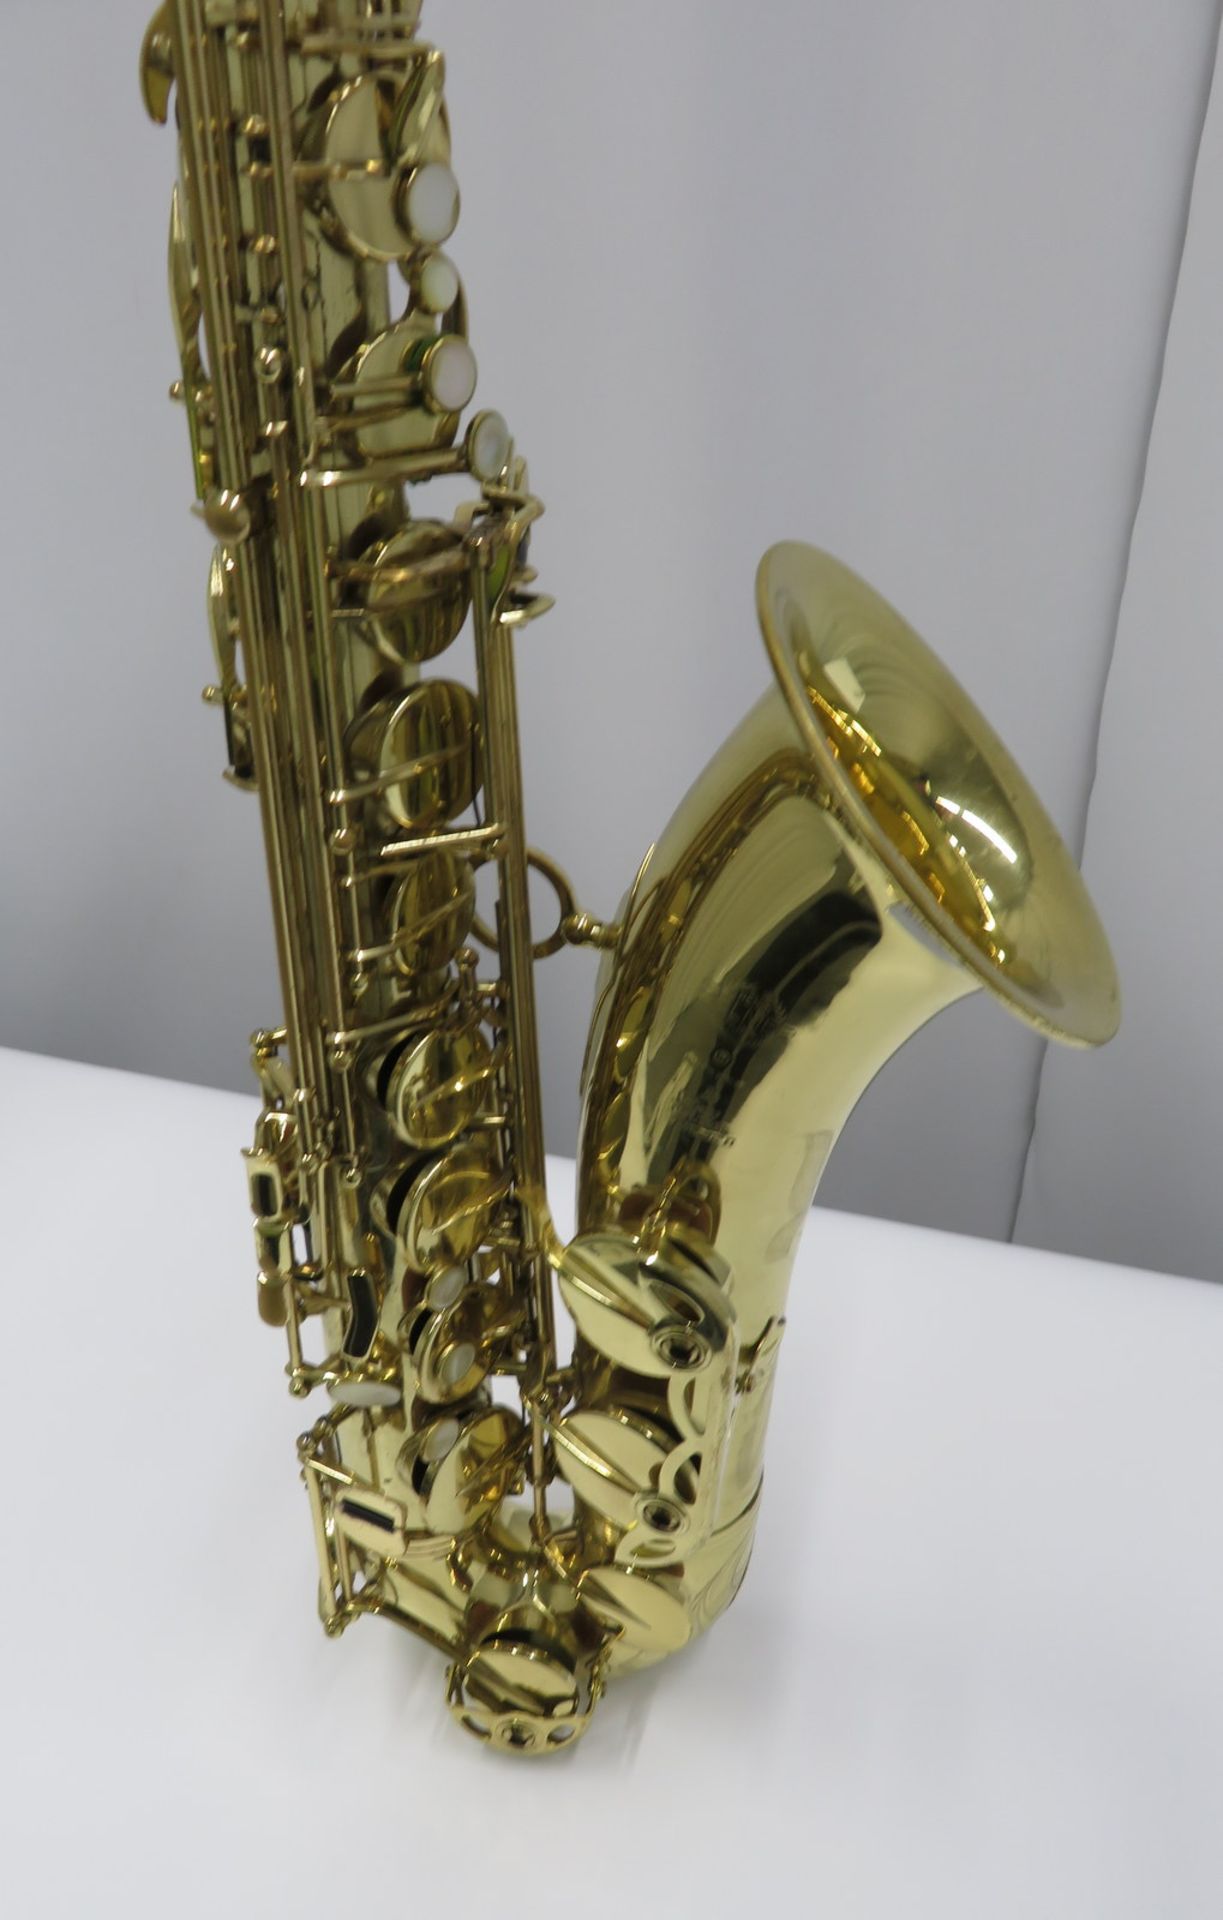 Henri Selmer 80 super action series 2 tenor saxophone with case. Serial number: N.613456. - Image 8 of 17